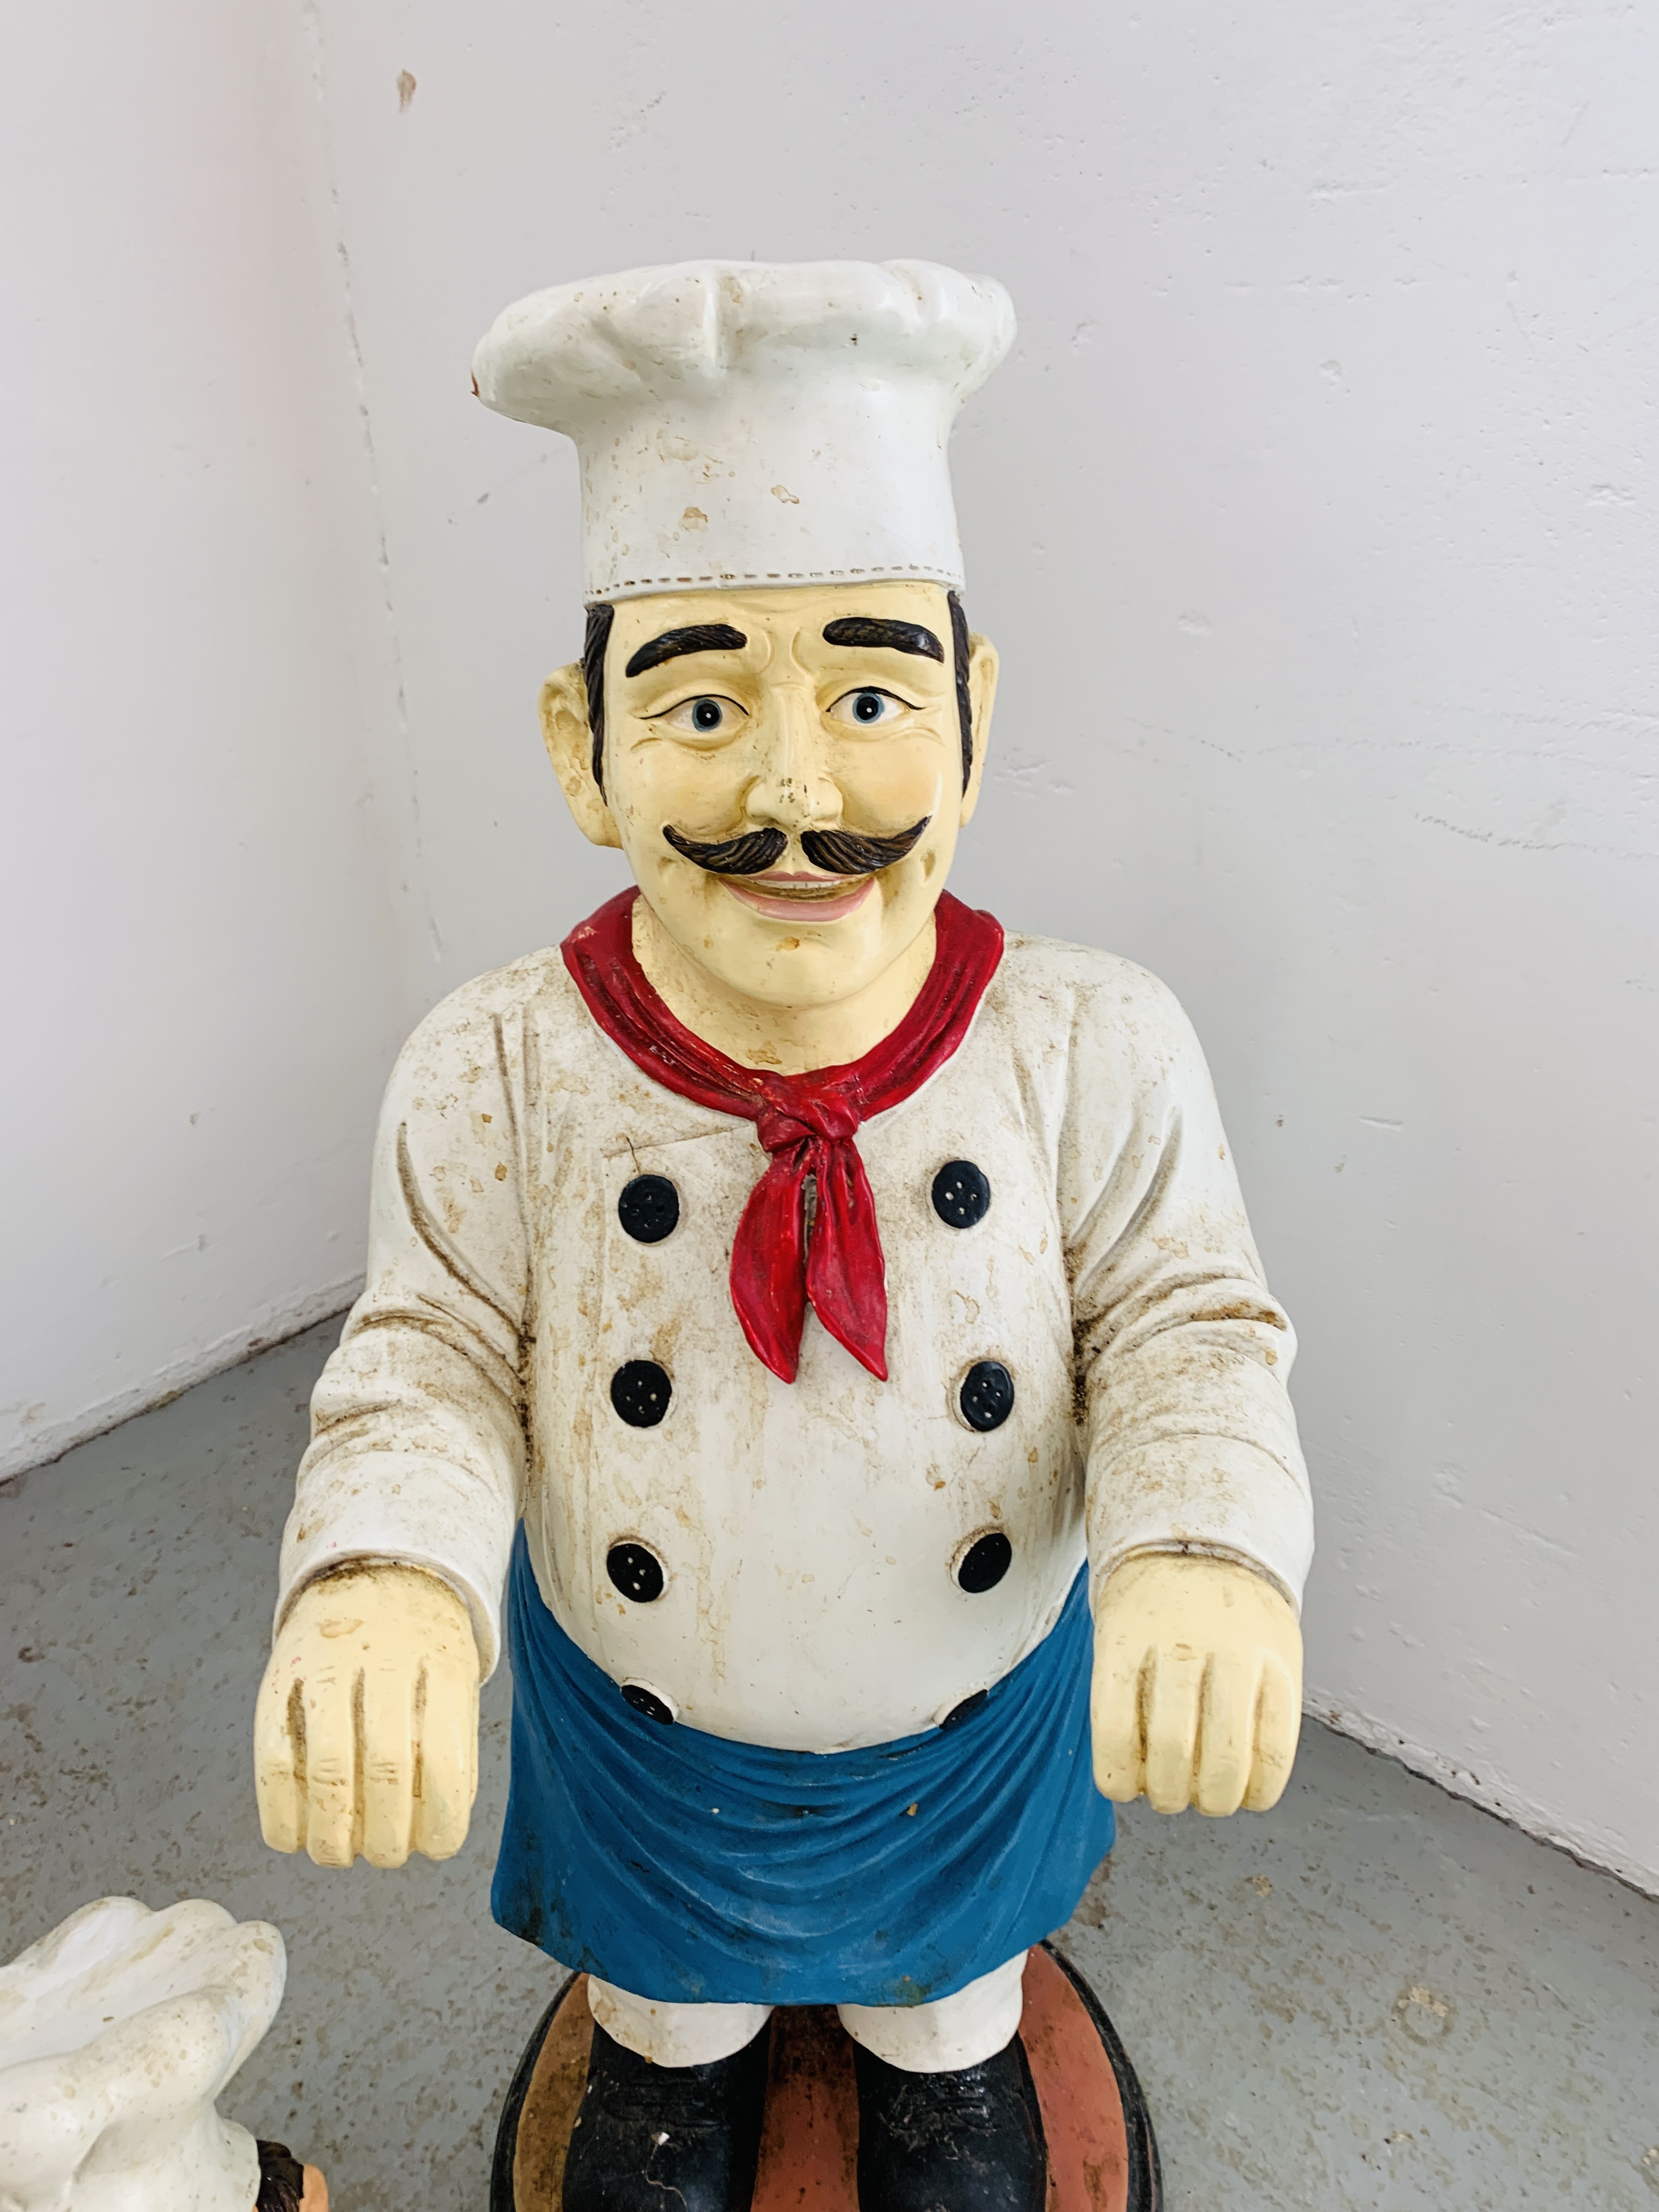 A NOVELTY STANDING "CHEF" FIGURE A/F AND ONE OTHER "CHEF" FIGURE - Image 2 of 12